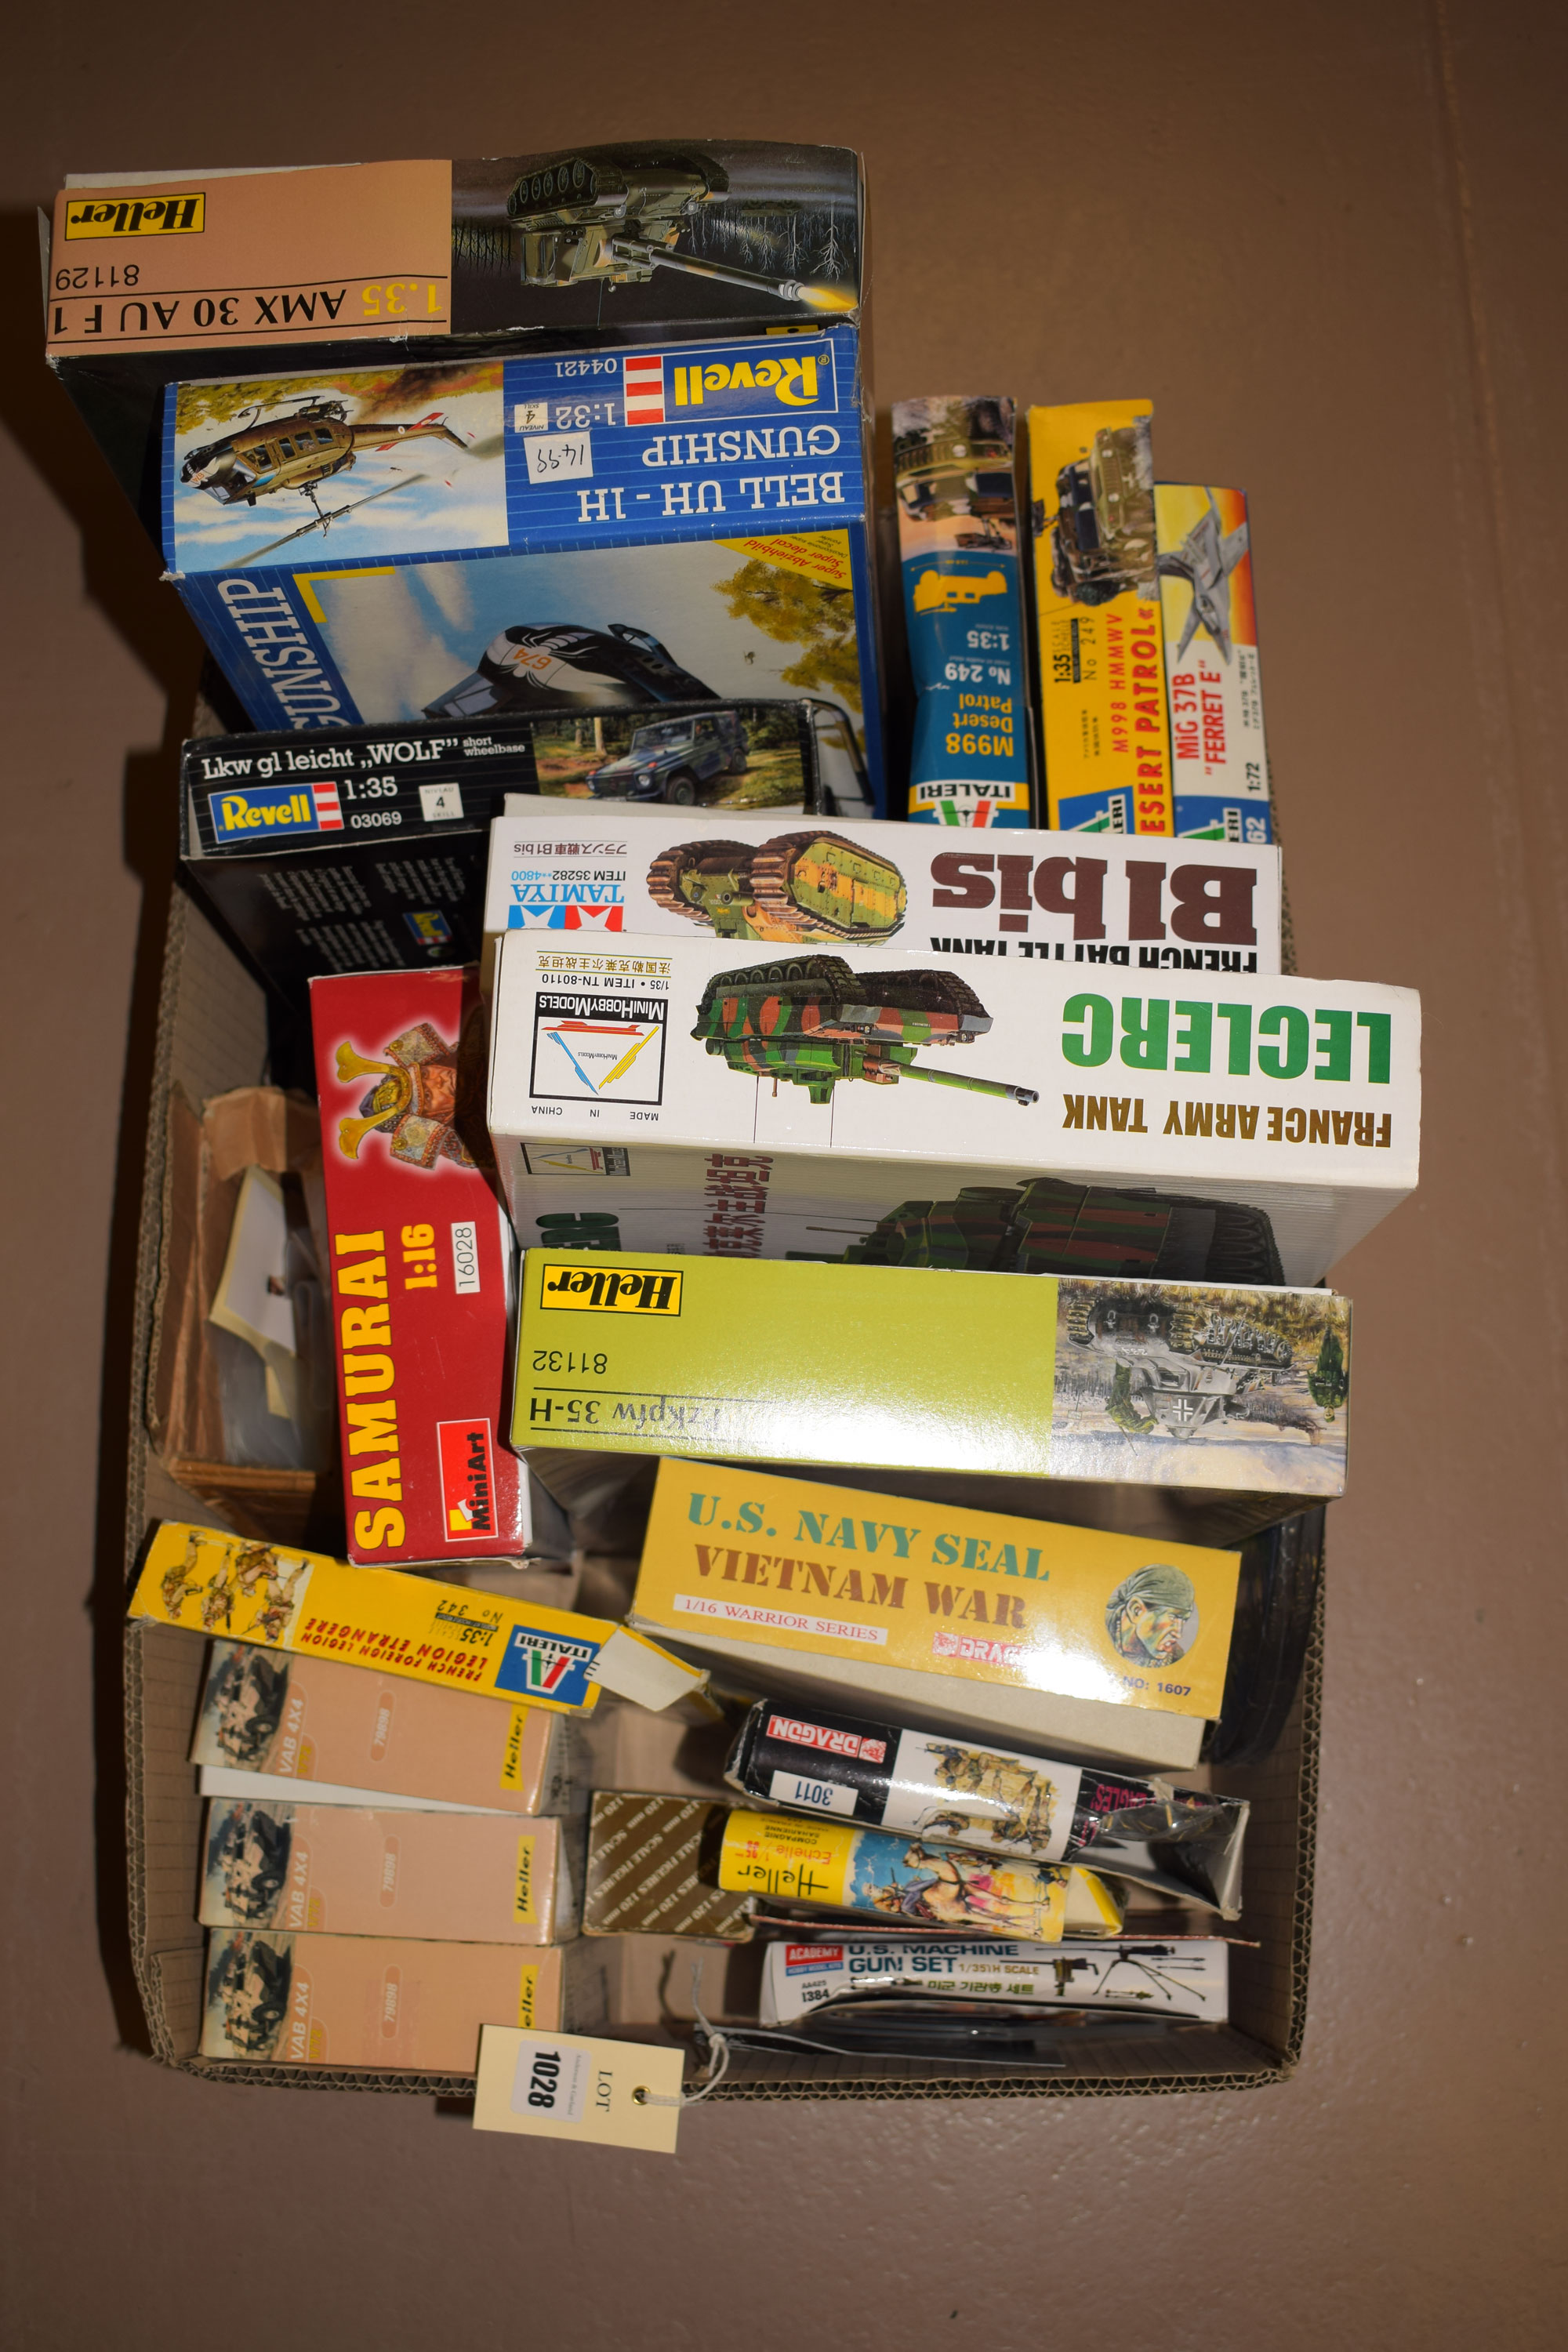 Model kits by: Heller; Italeri; Dragon; Revell; and others, mainly military interest.